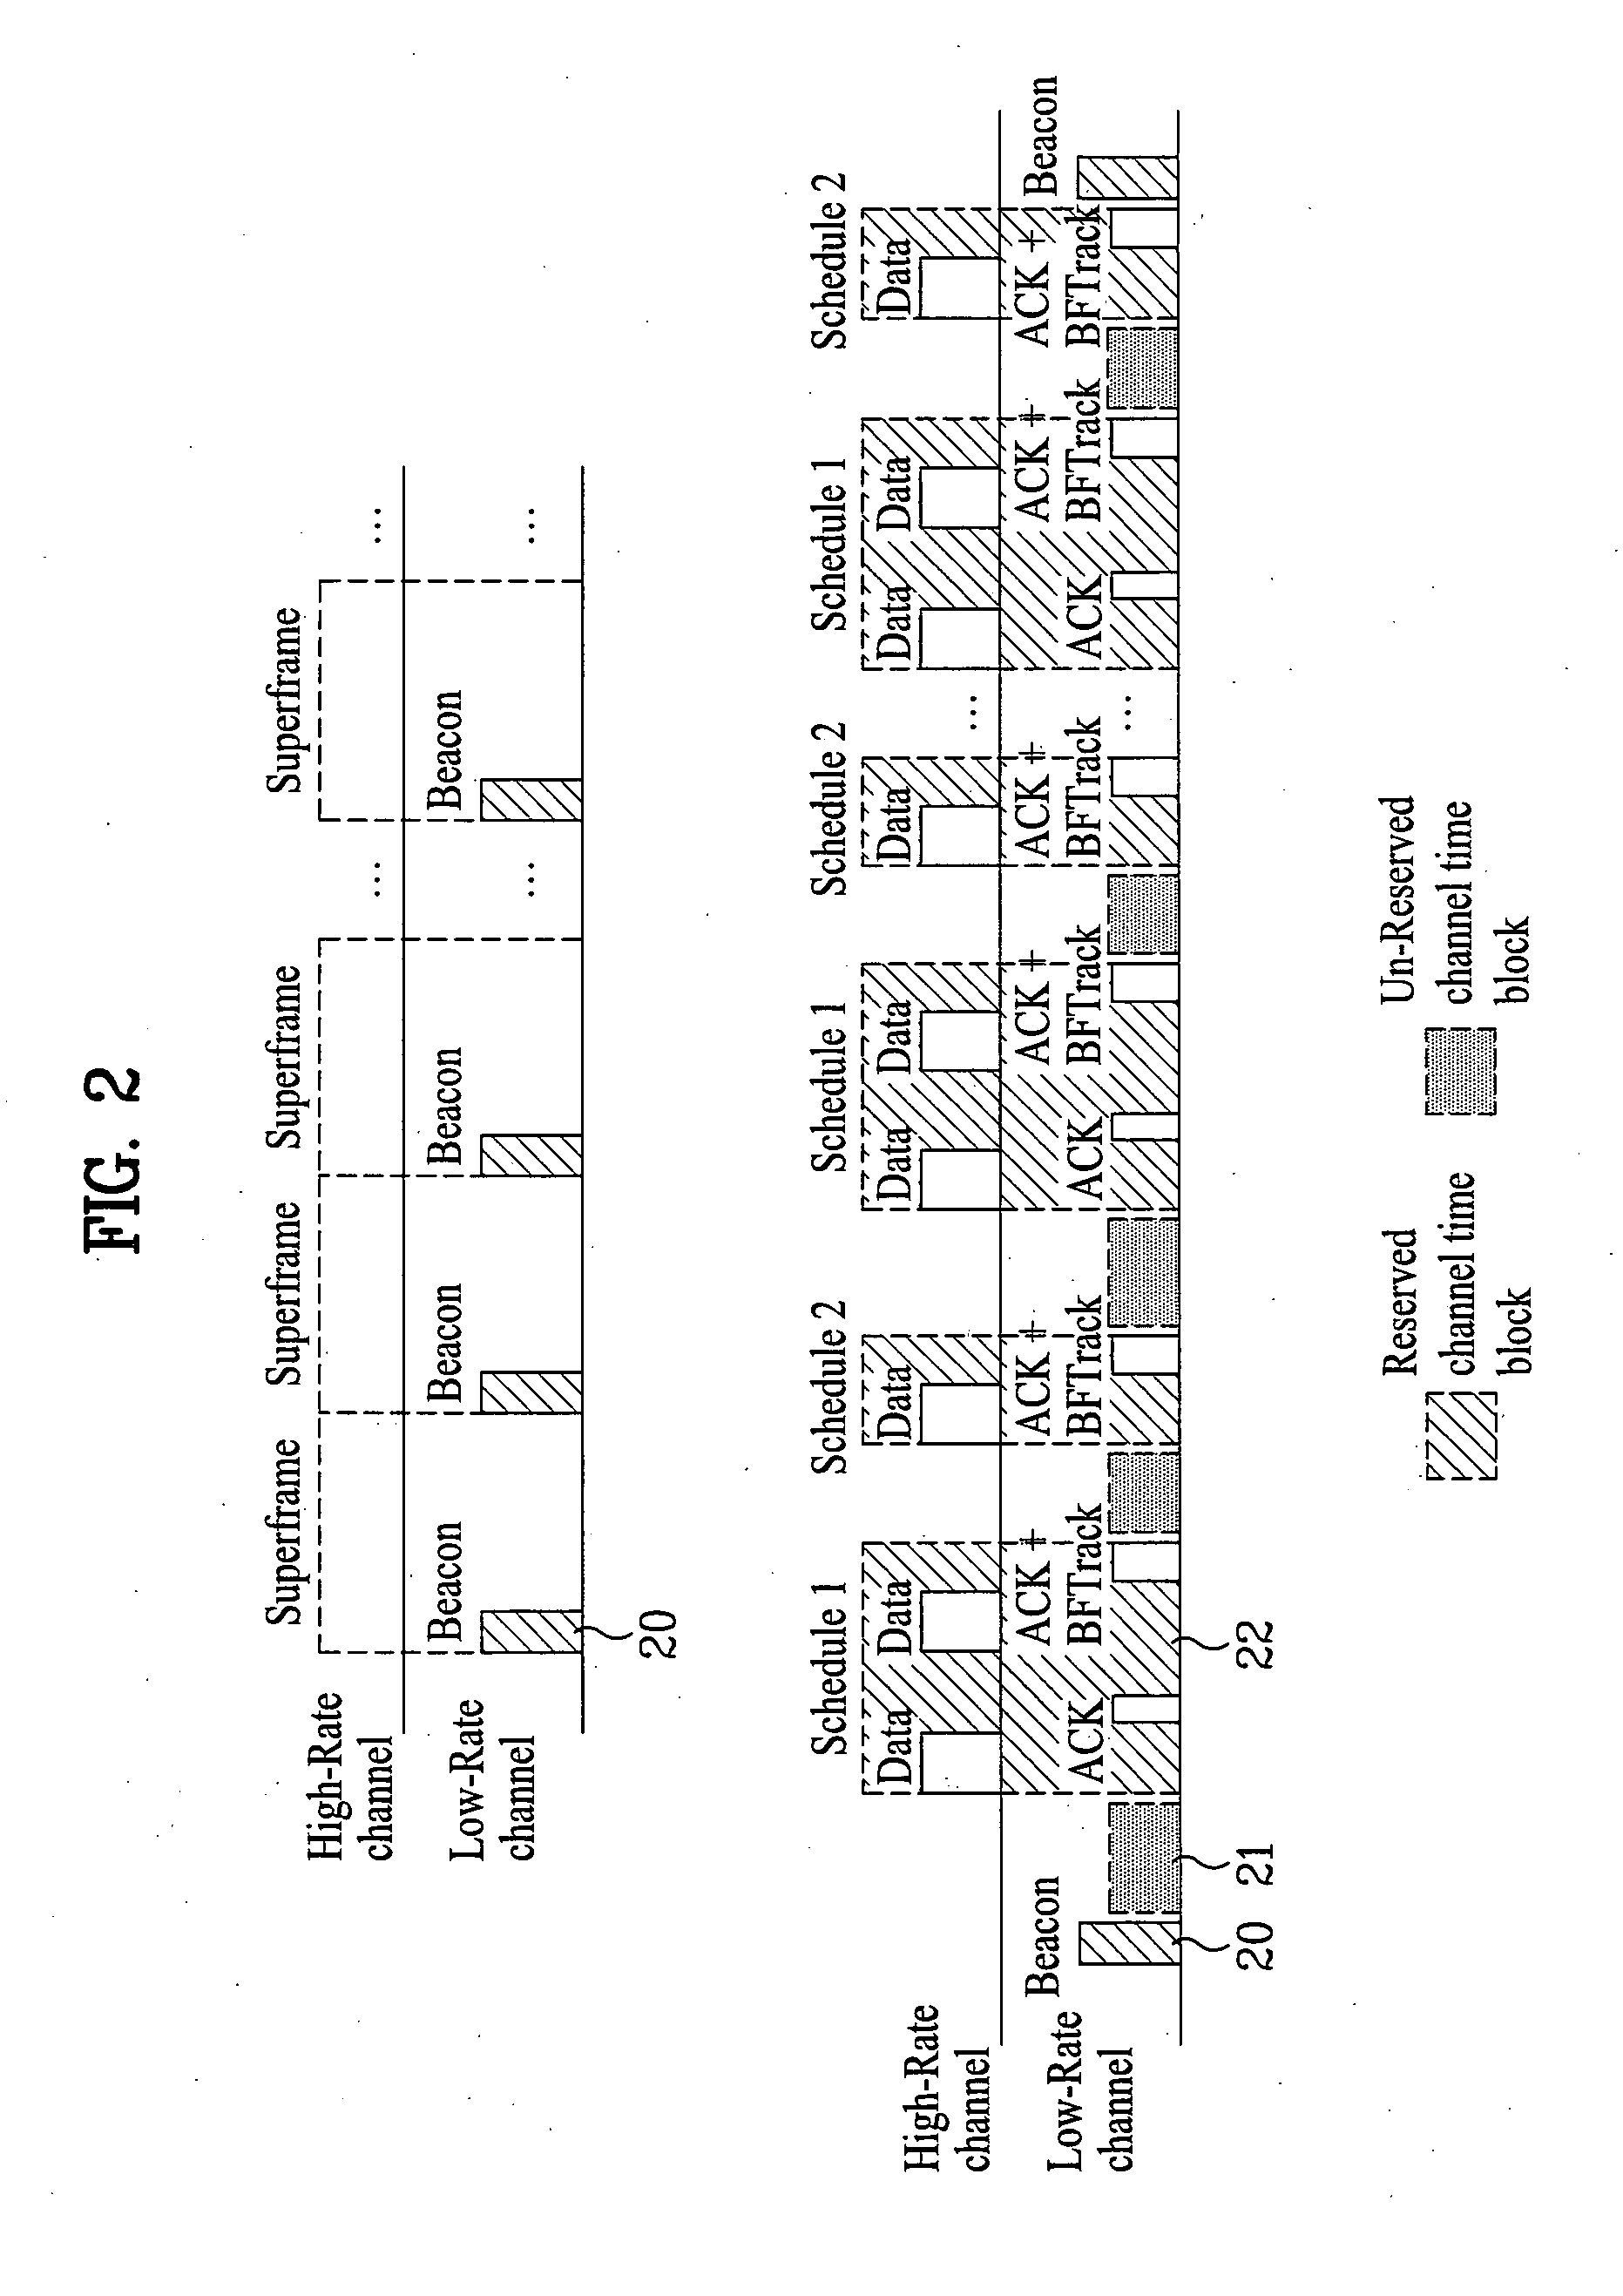 Method for managing the power in the wireless network